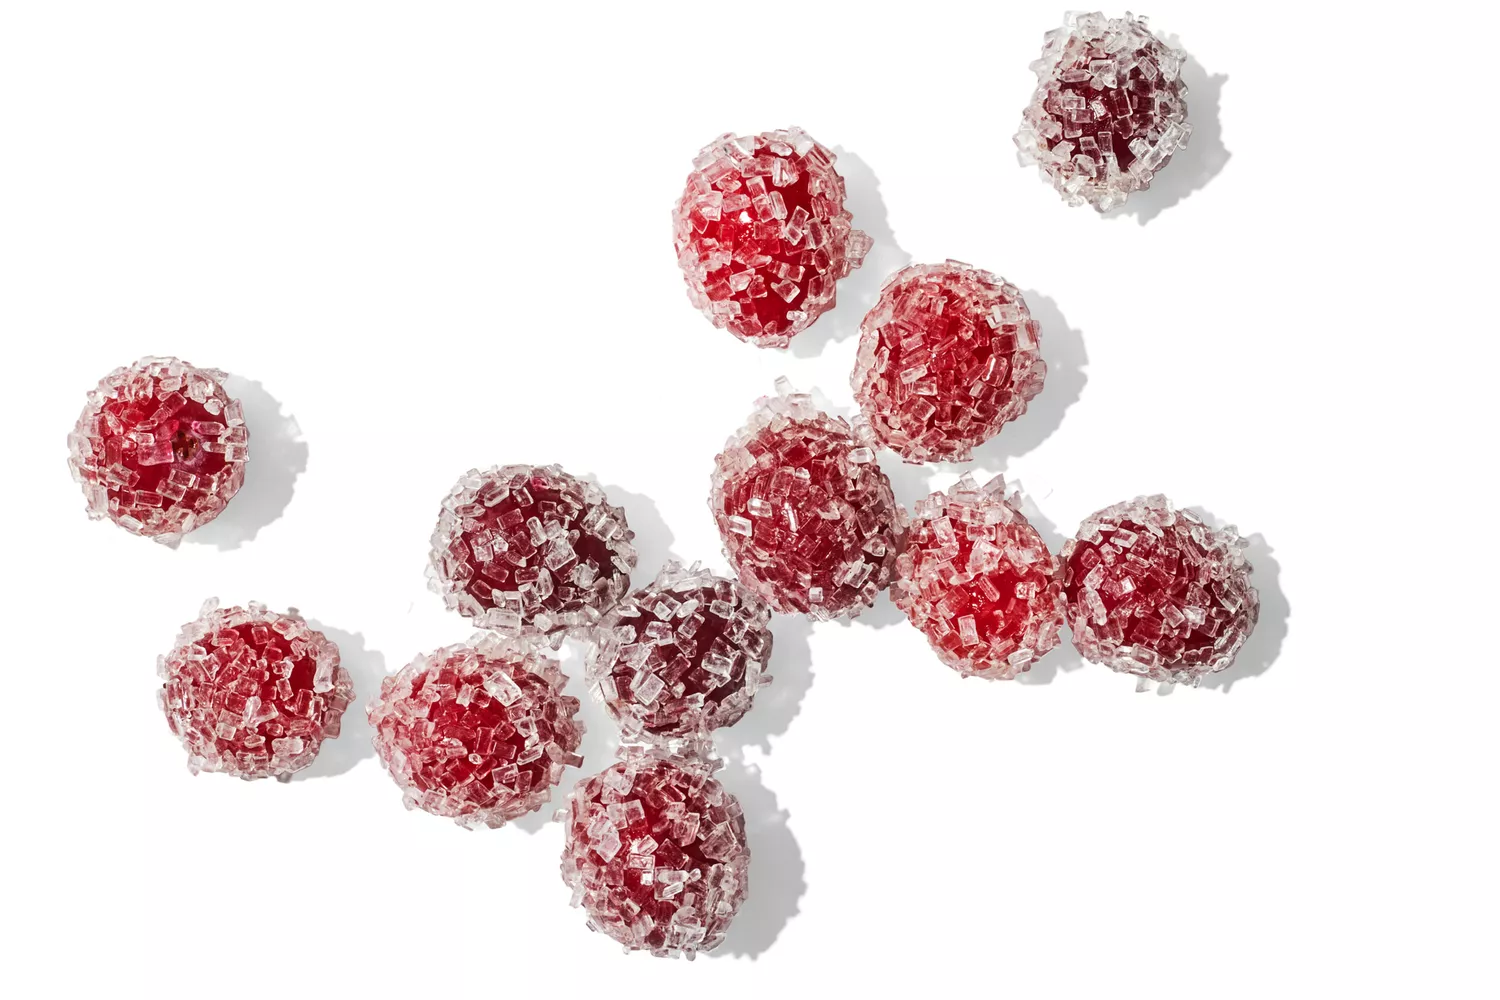 Sparkling cranberries on white background